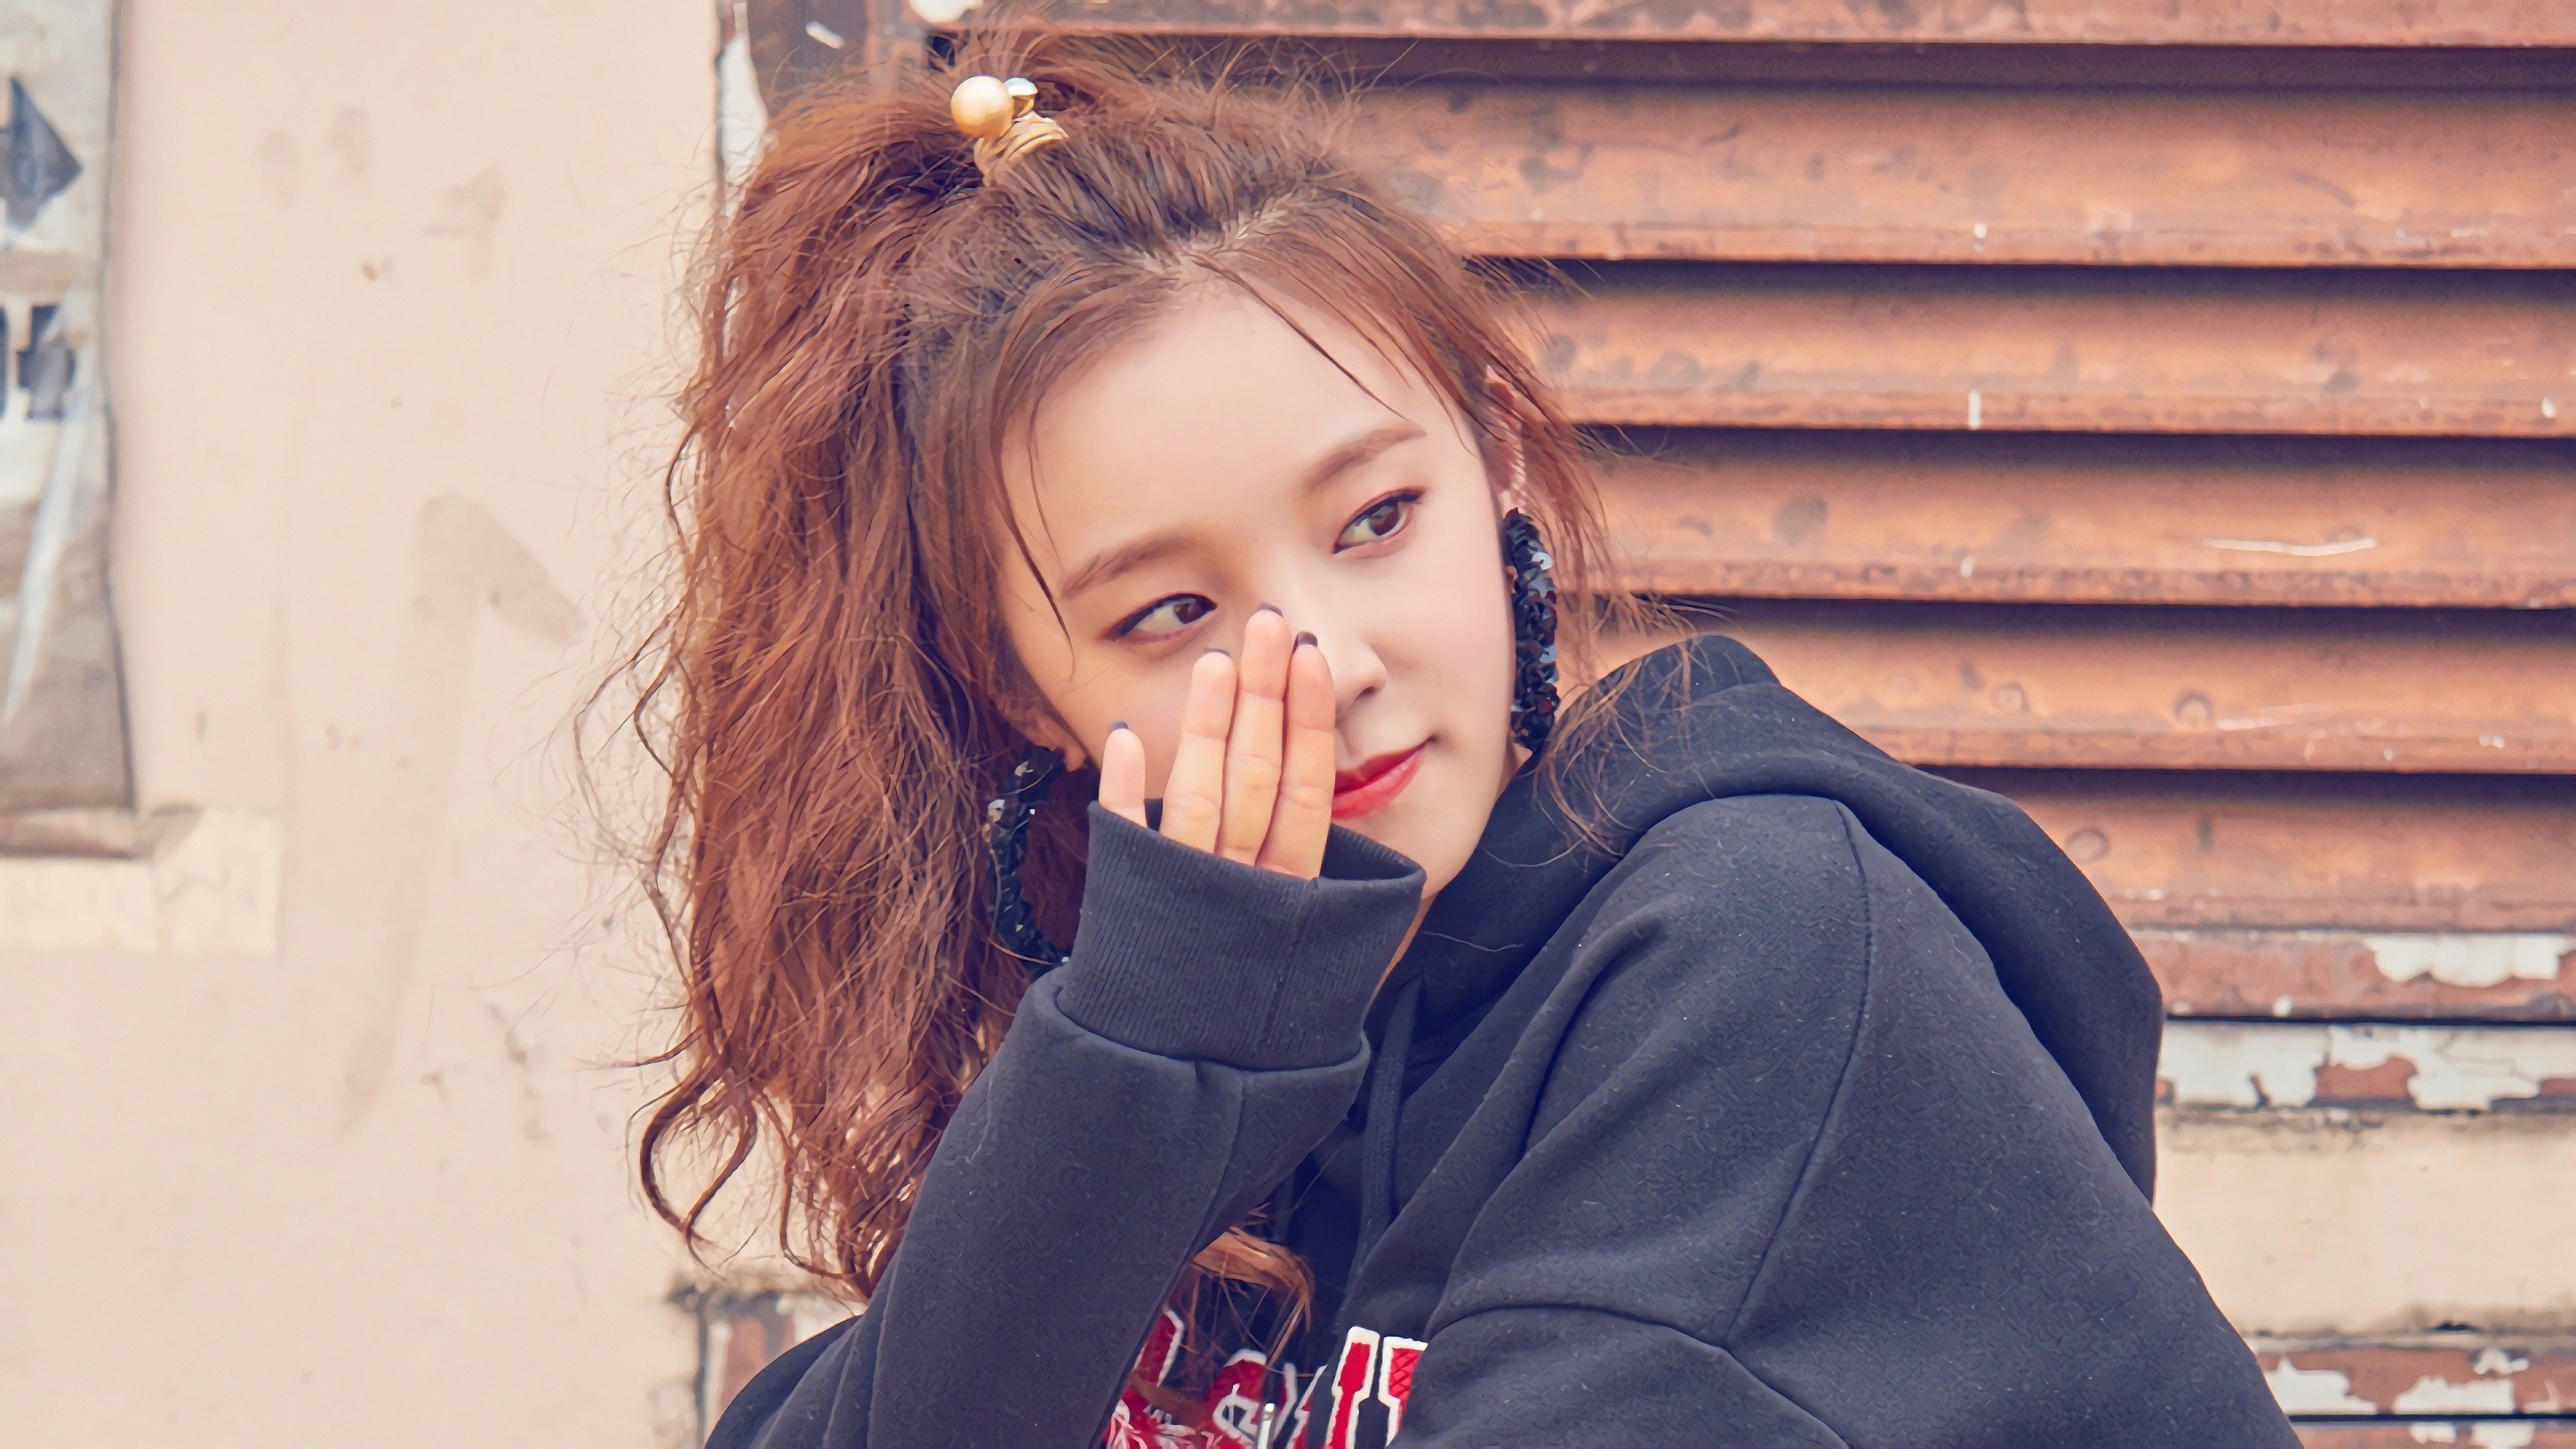 Yuqi was born and educated in China.